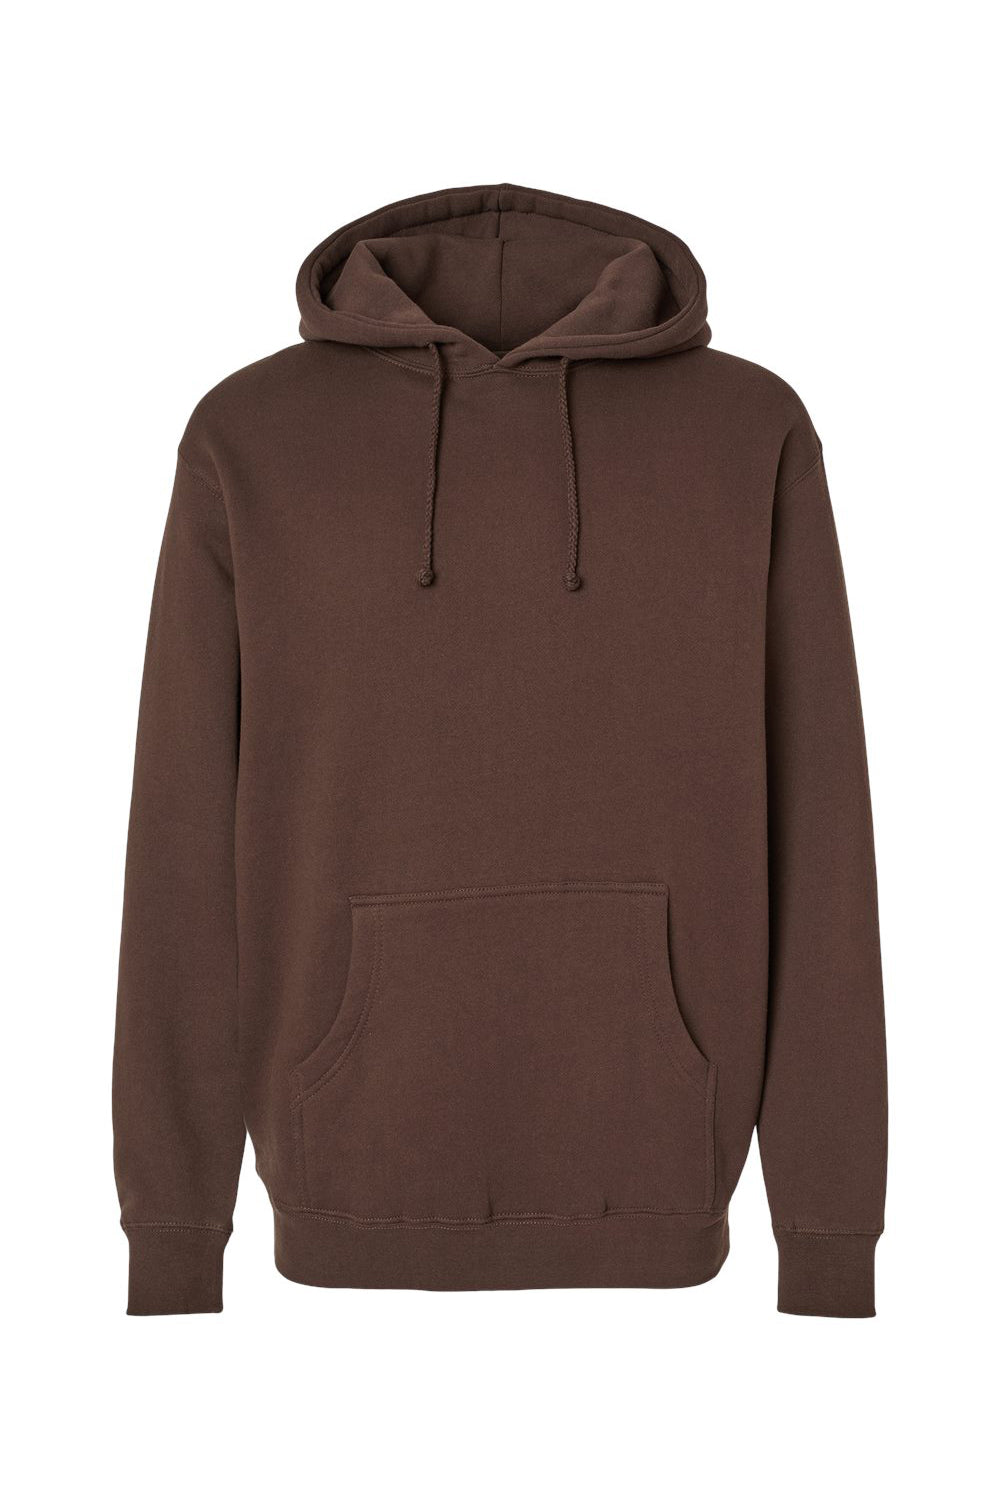 Independent Trading Co. IND4000 Mens Hooded Sweatshirt Hoodie Brown Flat Front